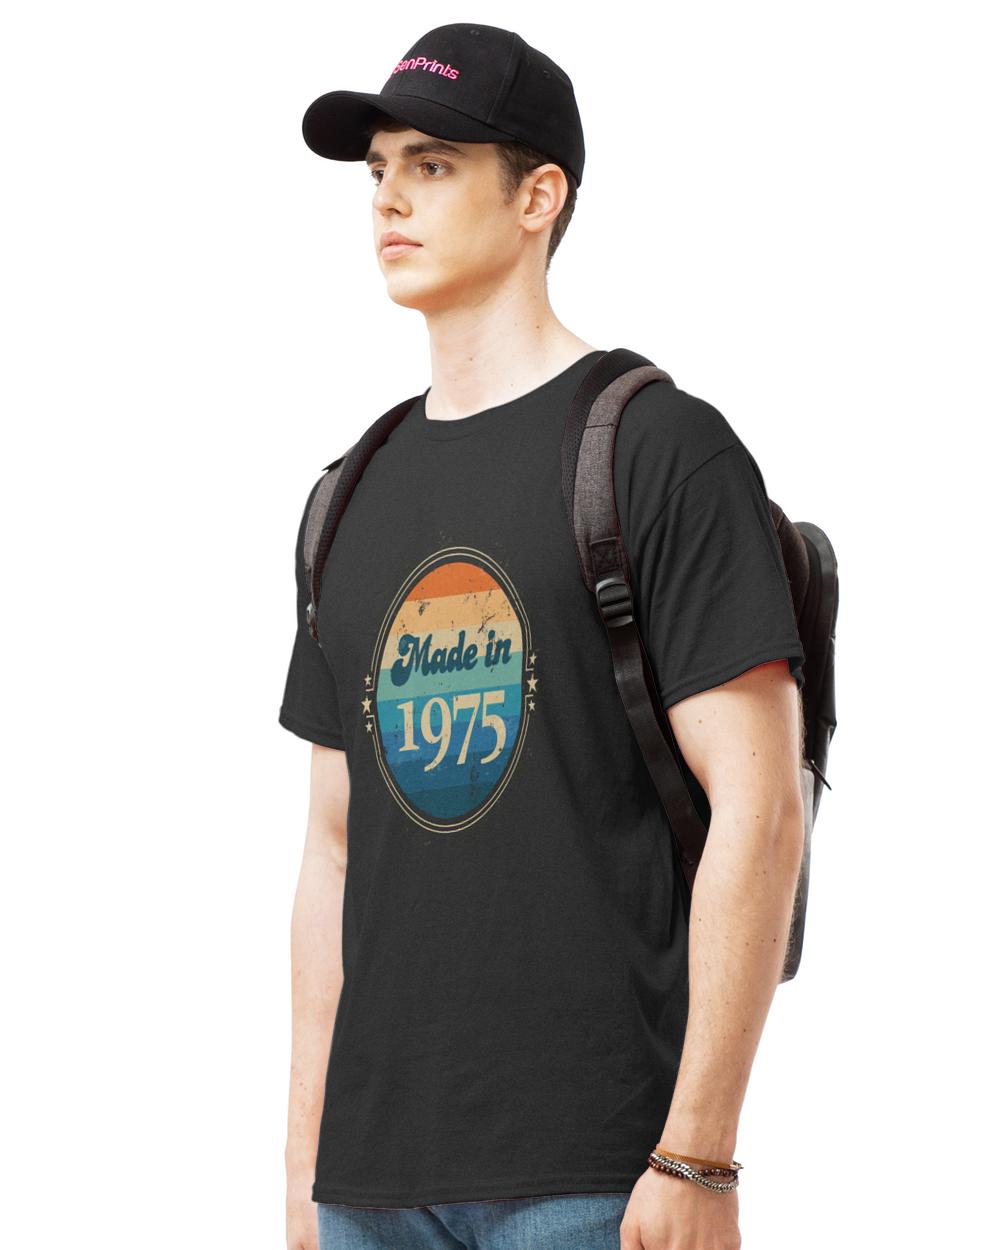 1975 T- Shirt Retro Vintage Made In 1975 T- Shirt